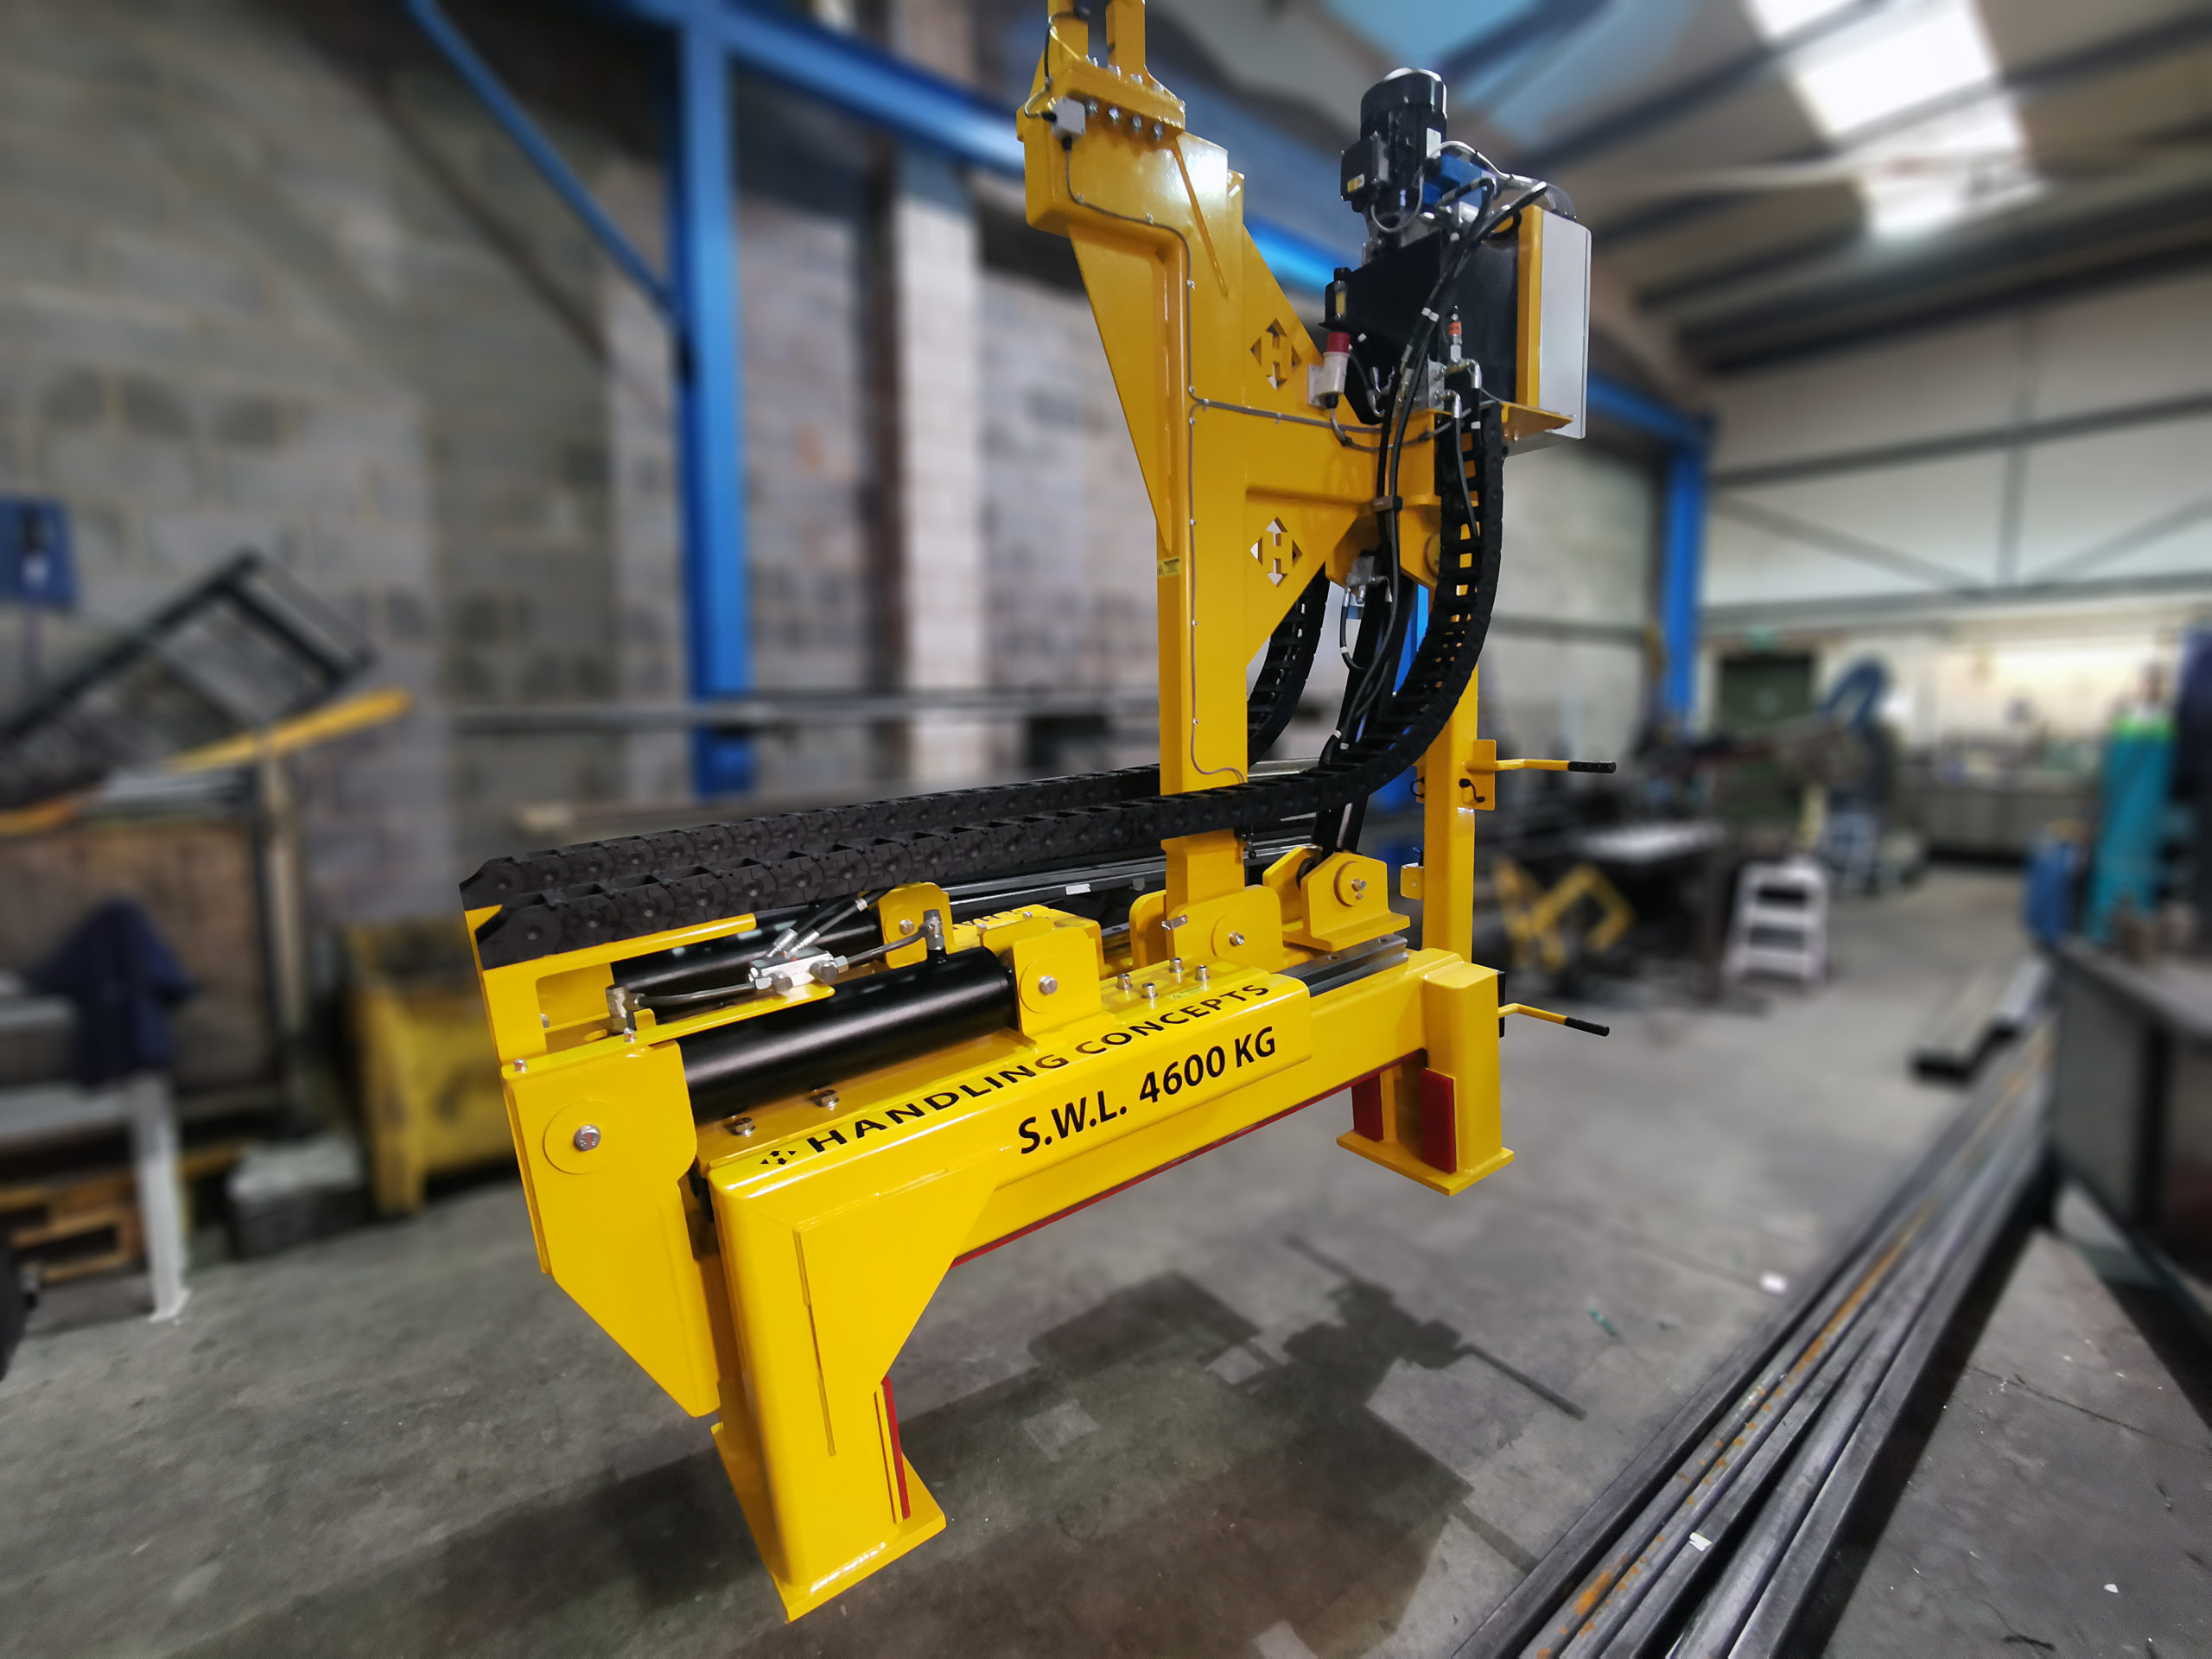 Handling Concepts' Hydraulic Grippers Materials Handling Equipment Solution